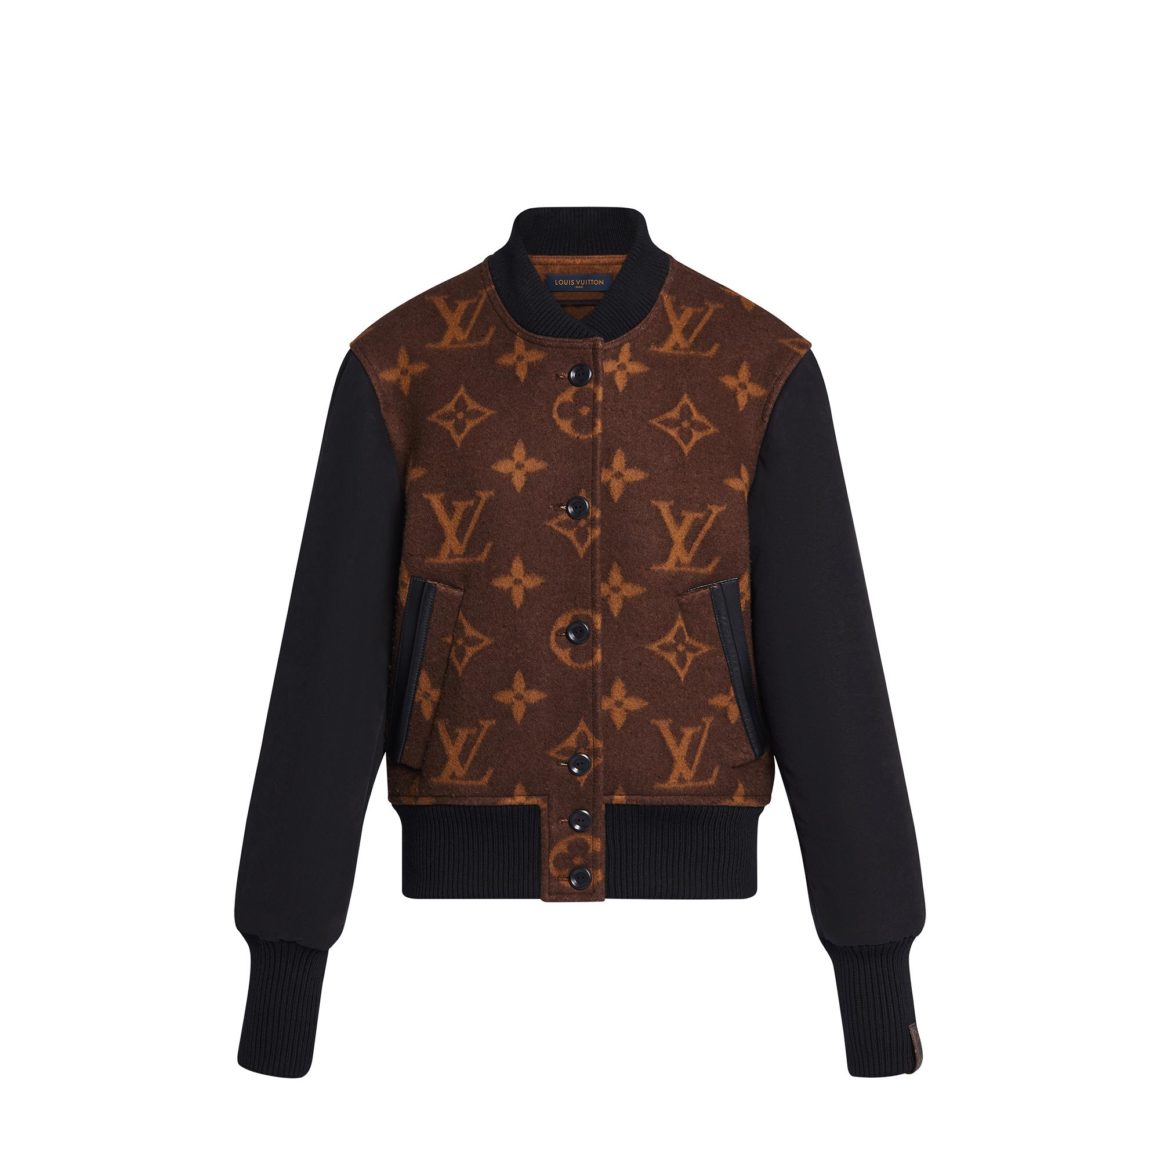 Exclusive Game Clothing - Custom #louisvuitton bomber jacket made